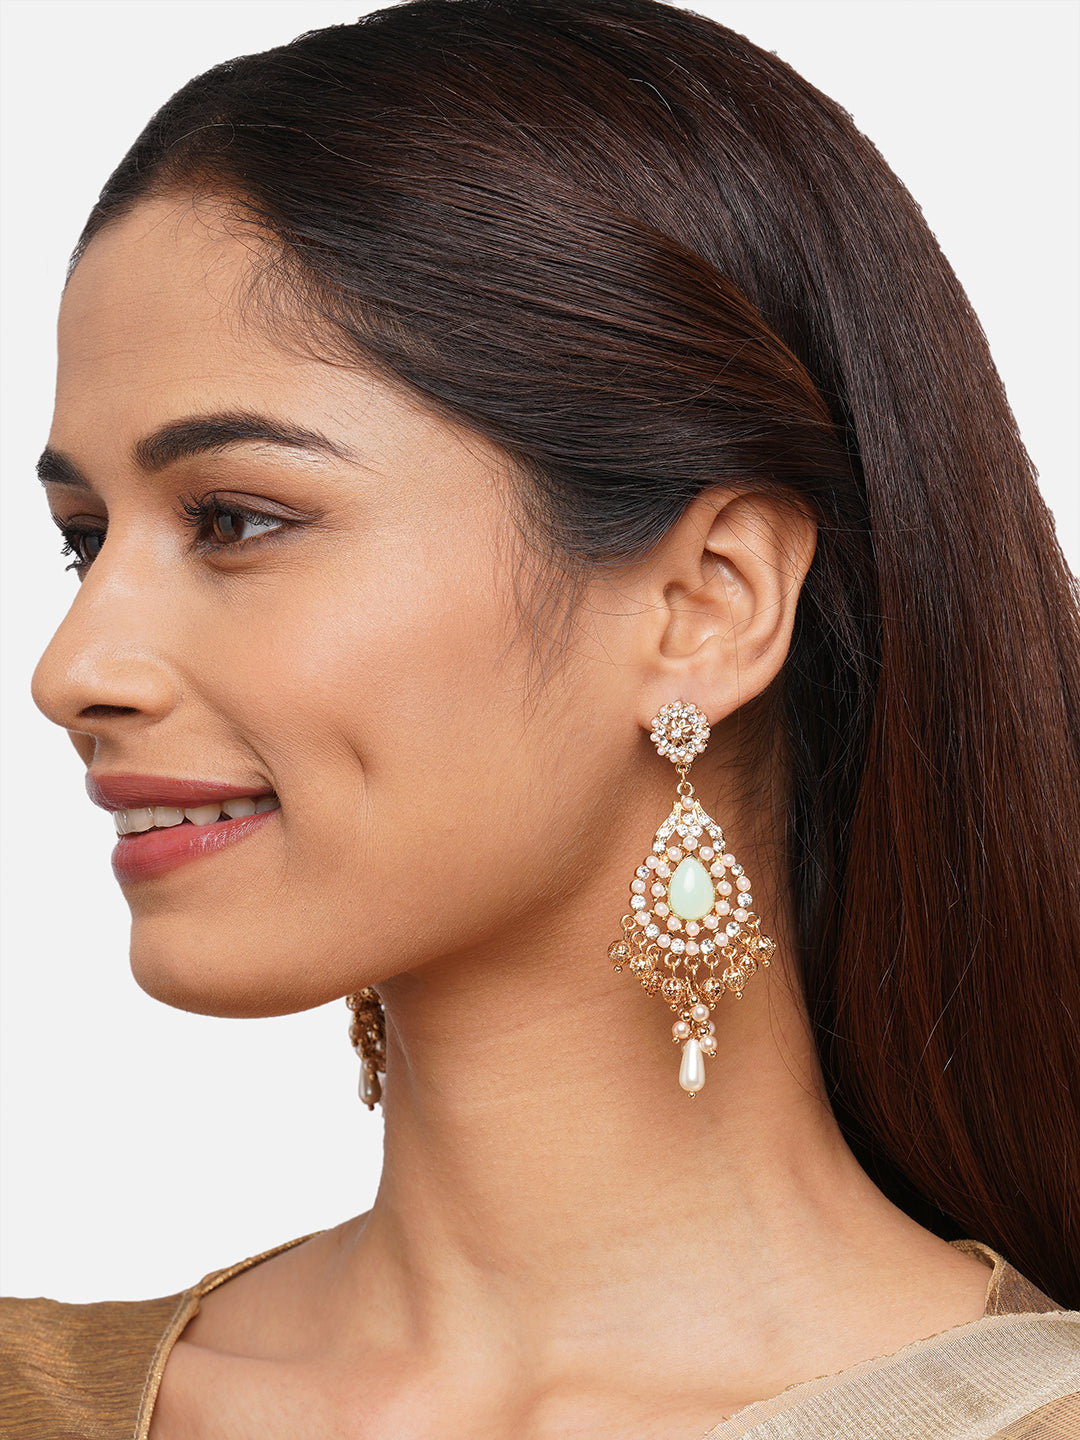 5 Must Have Traditional Jewelleries That Transforms Your Look and Feel